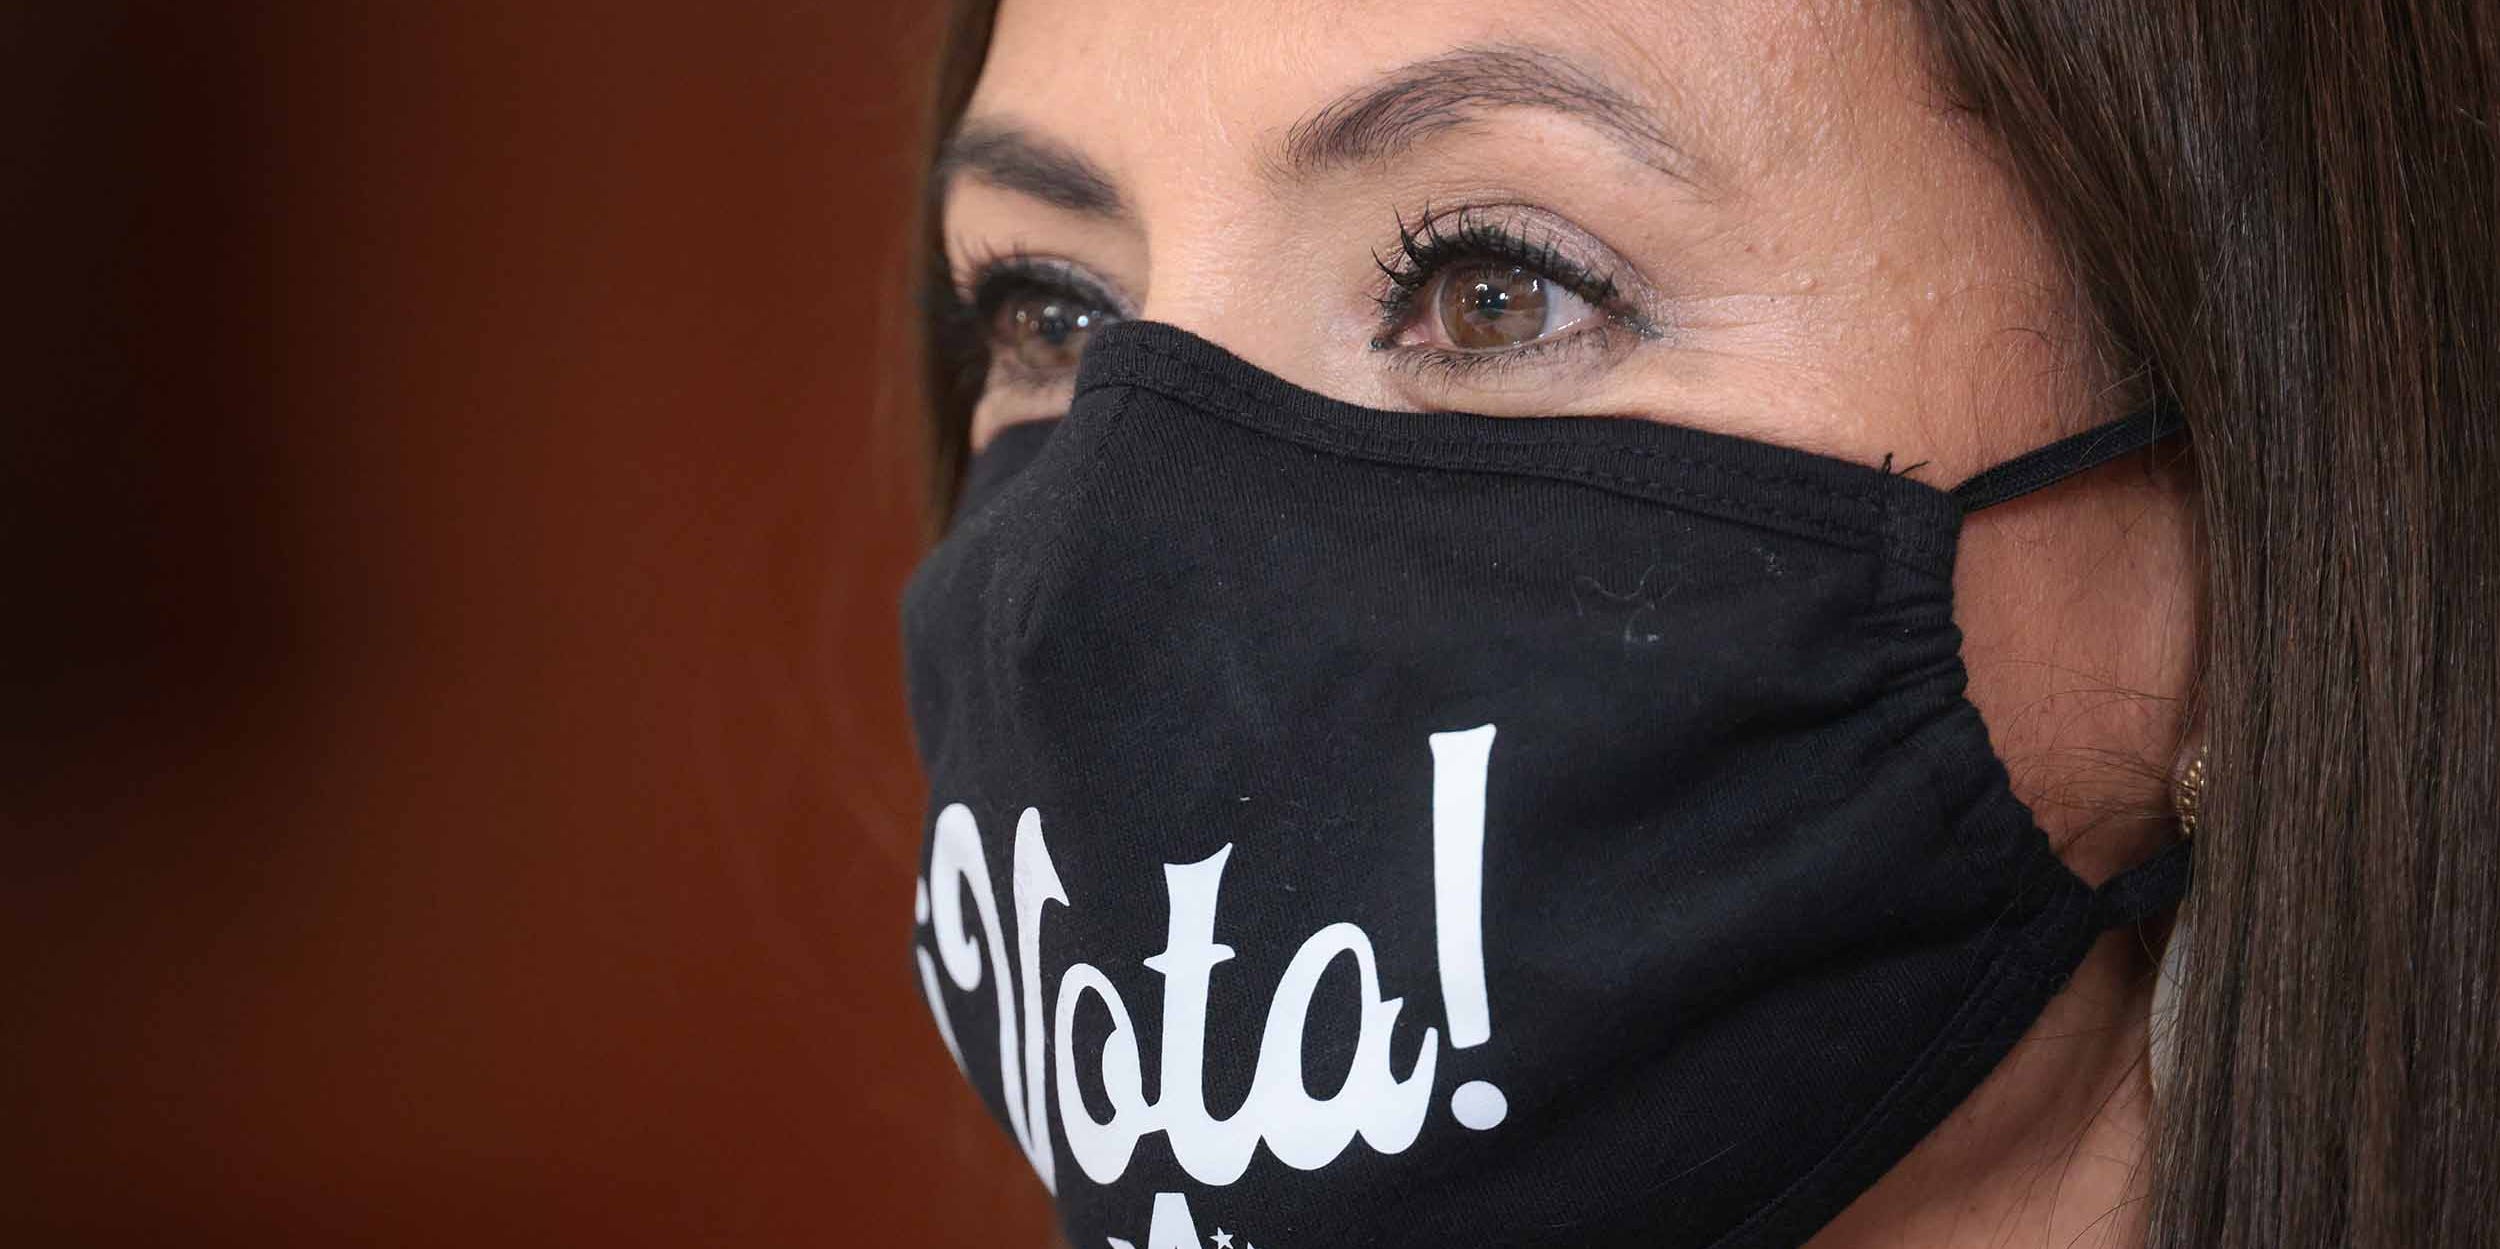 A voter is seen wearing a face covering with the Spanish translation of the word "vote" written on it.